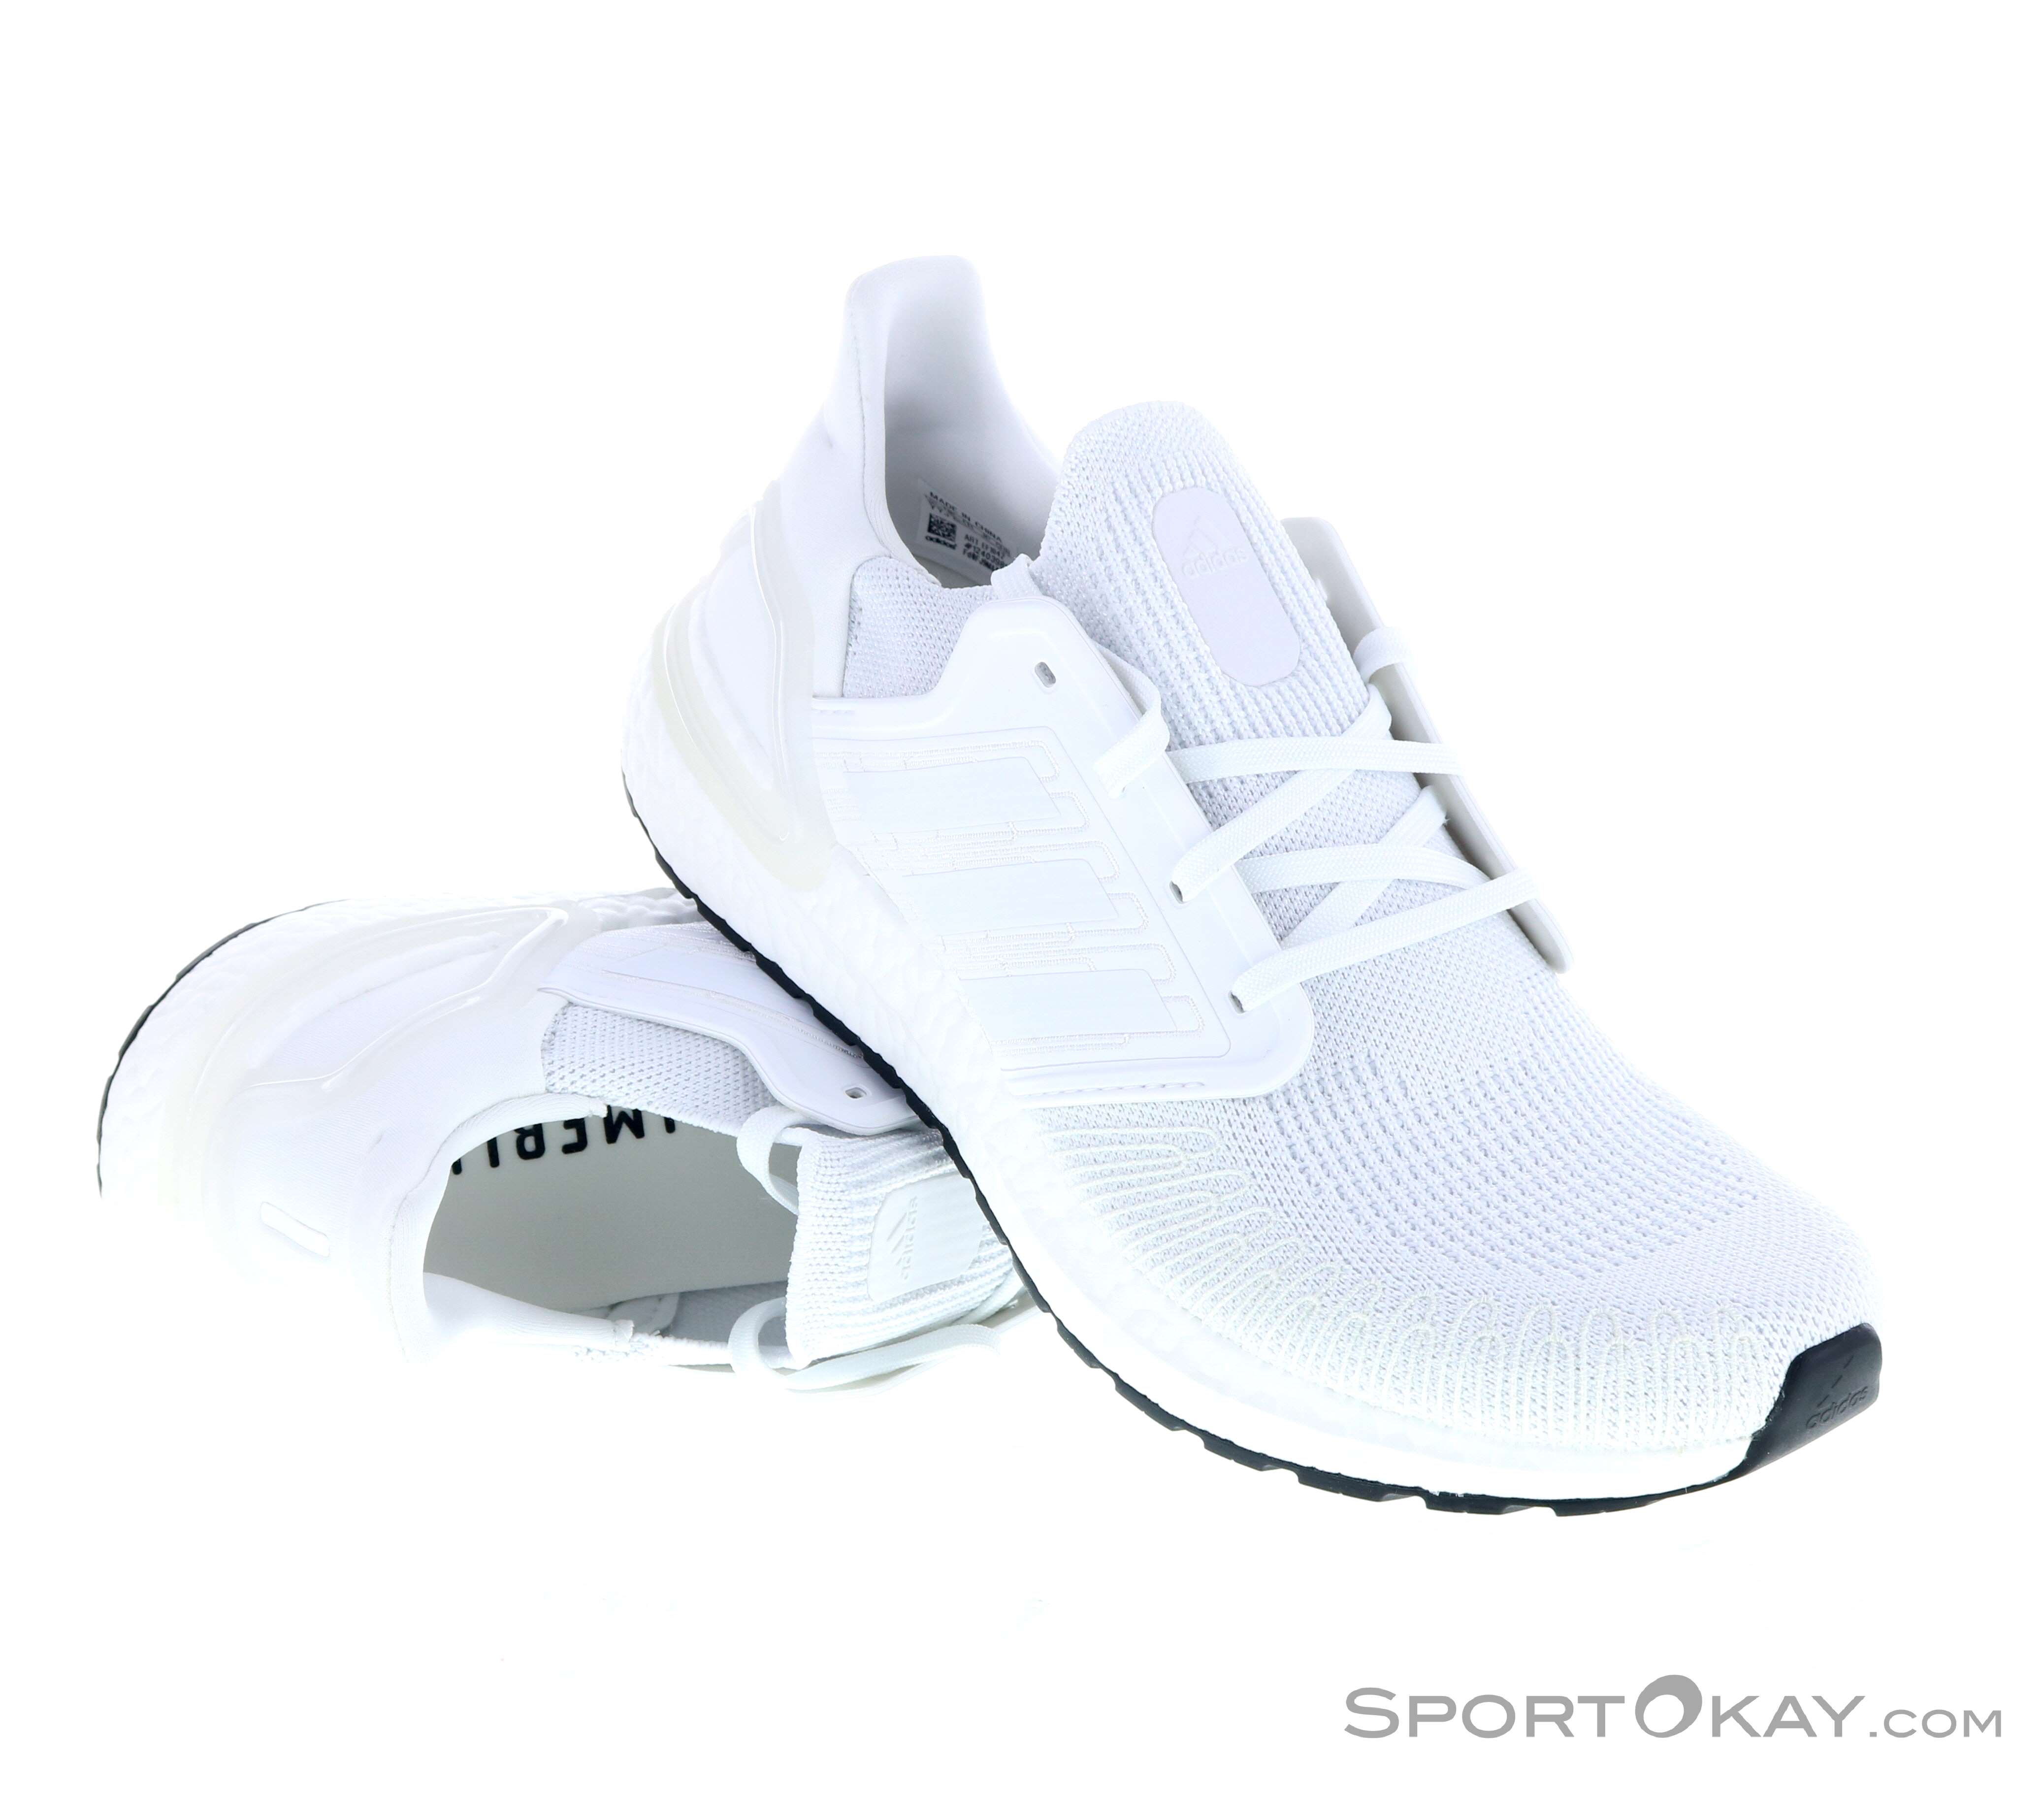 adidas ultra boost mens running shoes